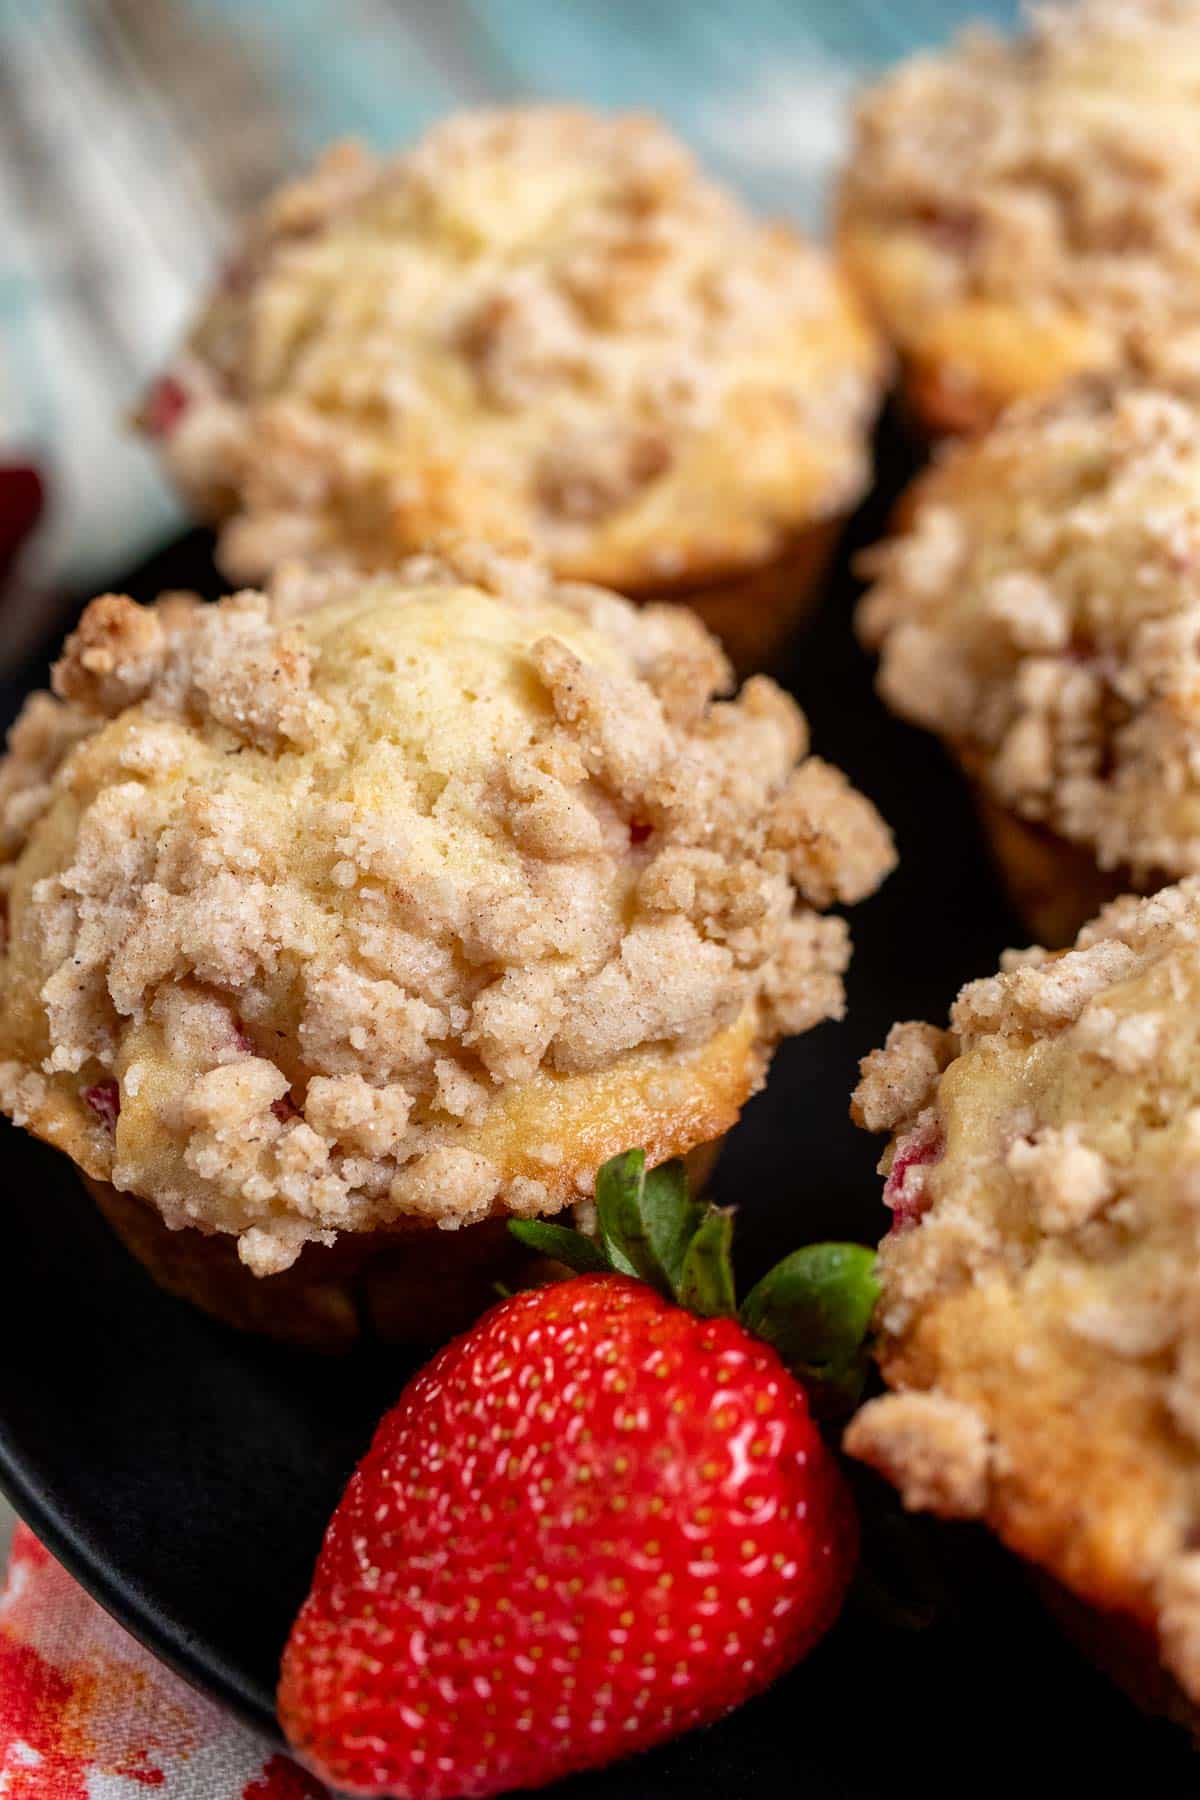 Close up view of strawberry rhubarb streusel muffins on a black plate with a large, red strawberry next to them.